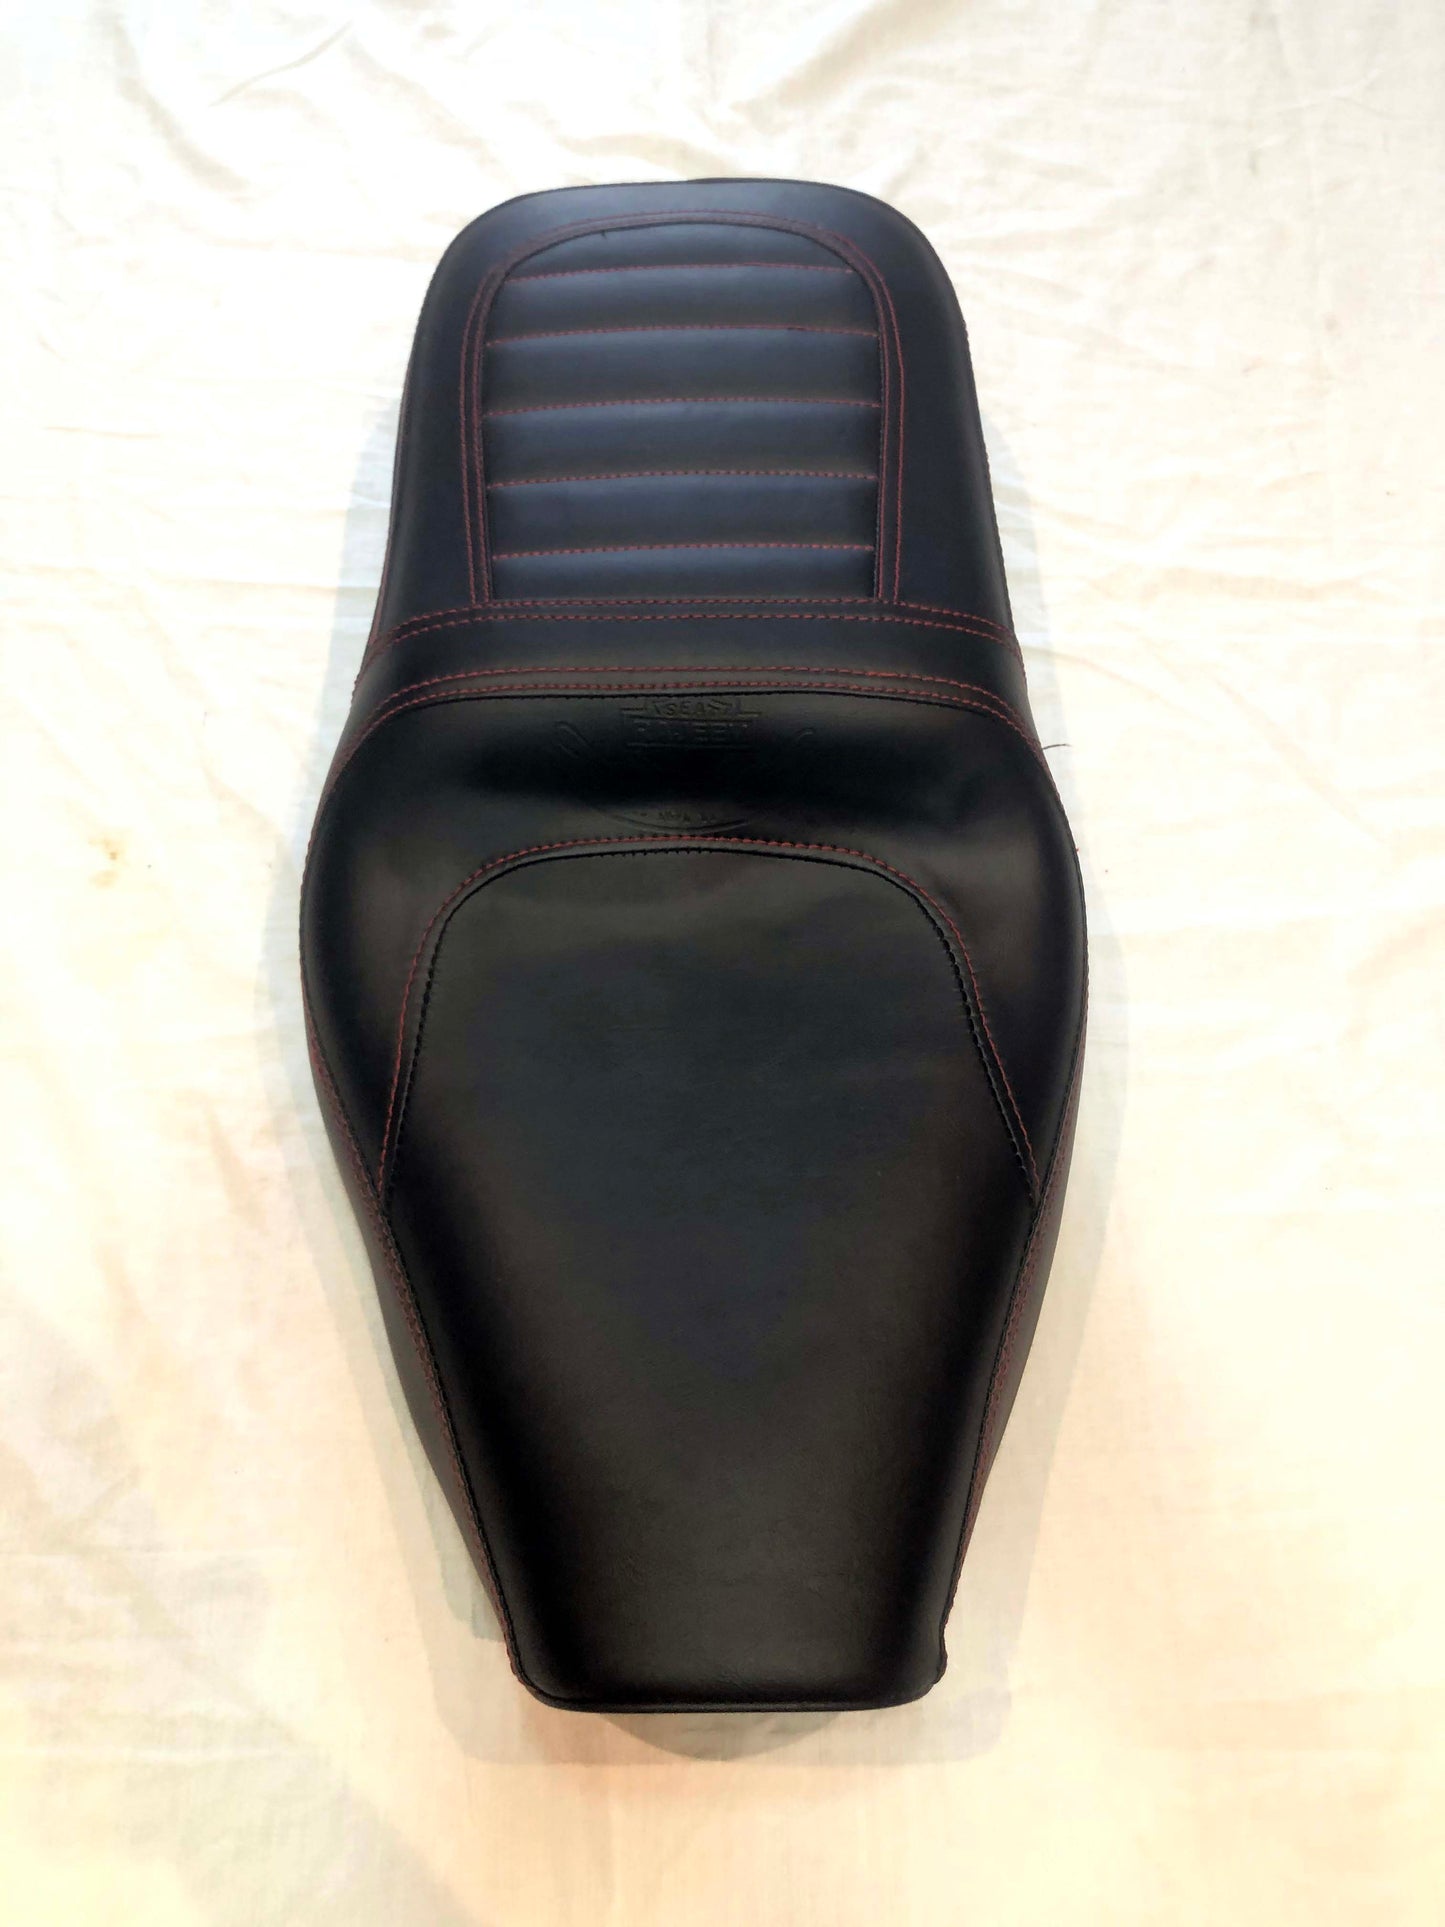 Comfort Seat for Jawa all Models - Premium Seats from Sparewick - Just Rs. 3800! Shop now at Sparewick